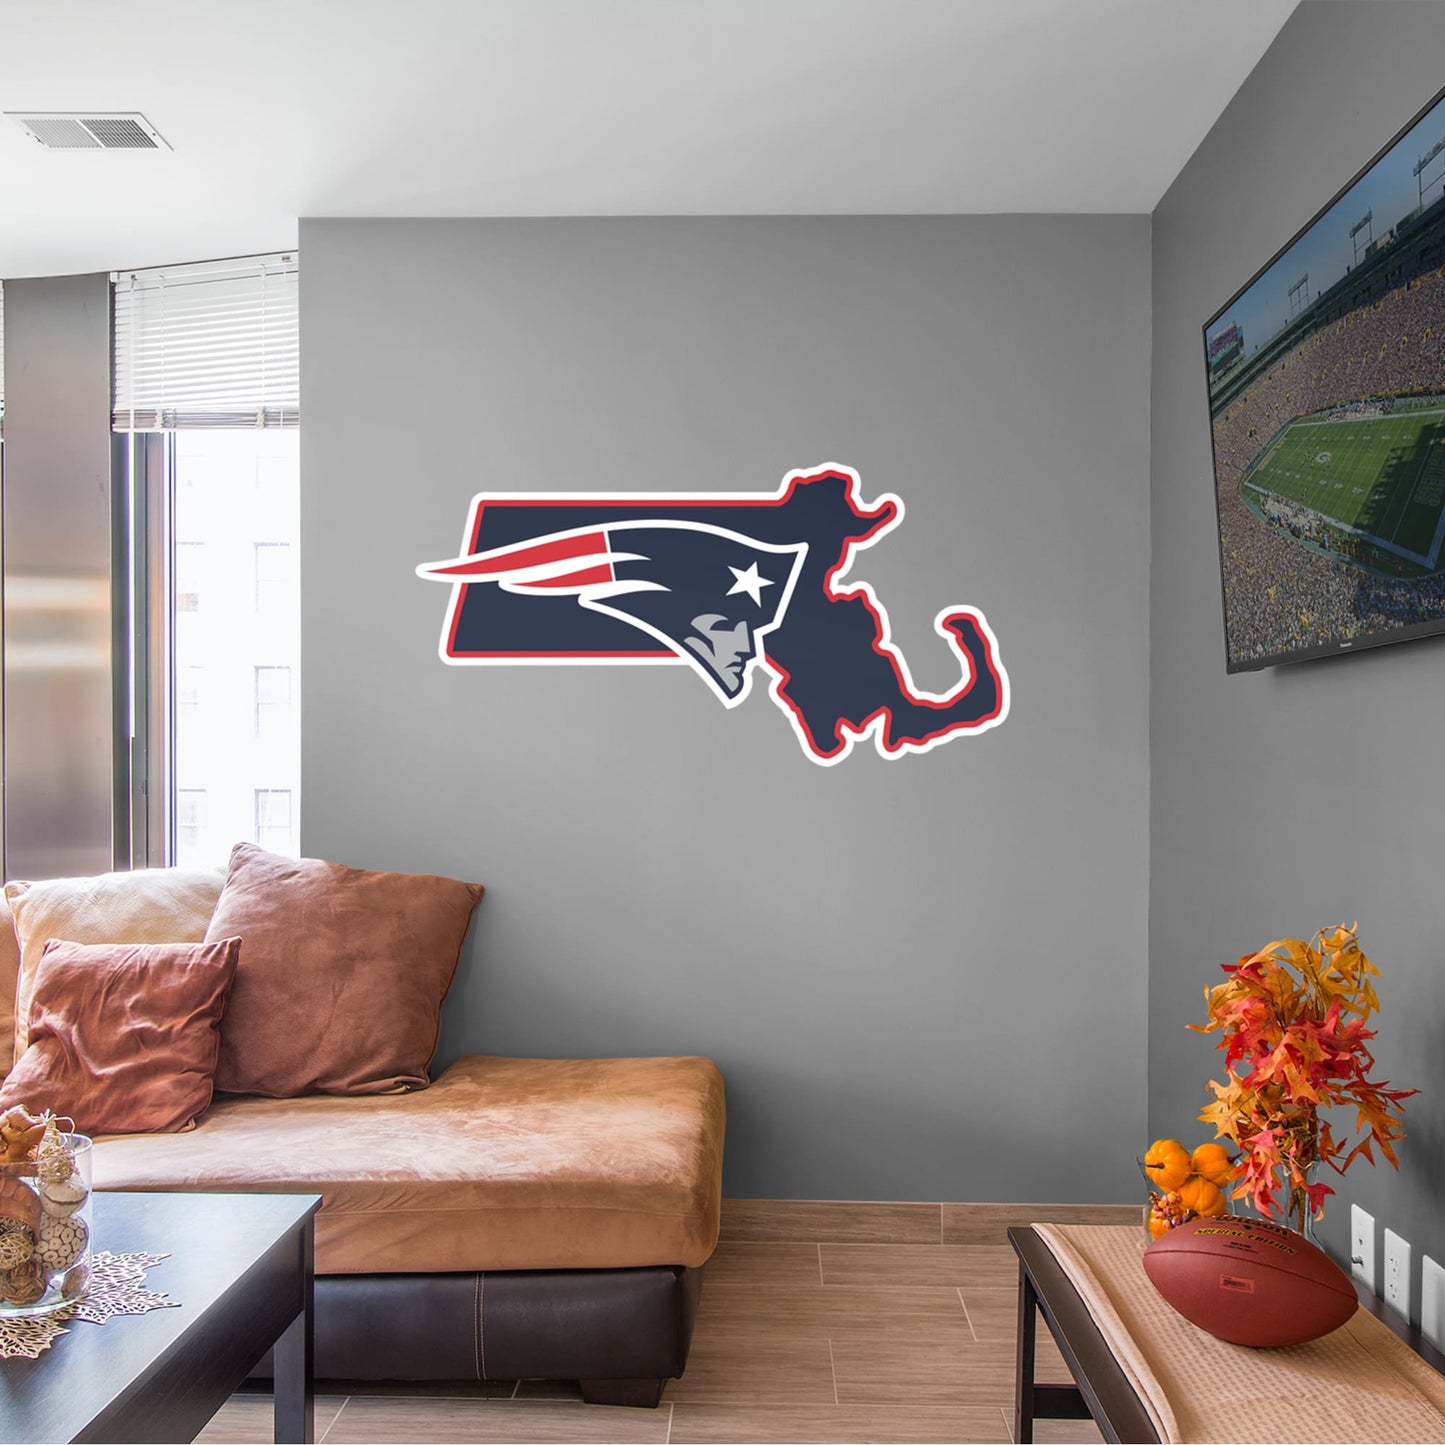 New England Patriots: State of Massachusetts - Officially Licensed NFL Removable Wall Decal